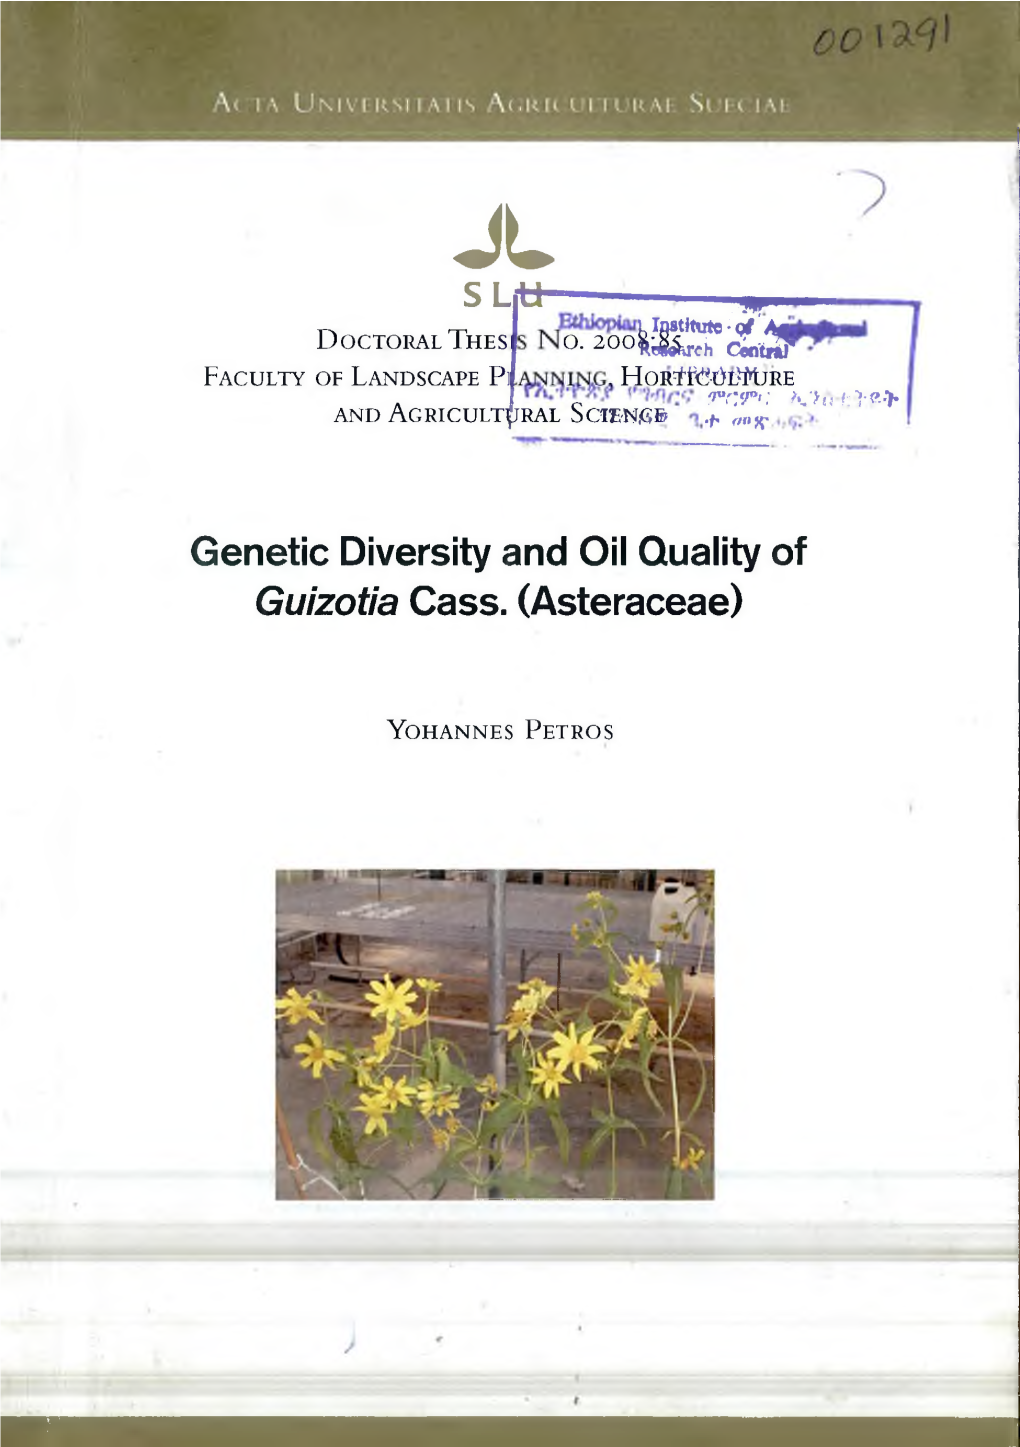 SL Genetic Diversity and Oil Quality of Guizotia Cass. (Asteraceae)